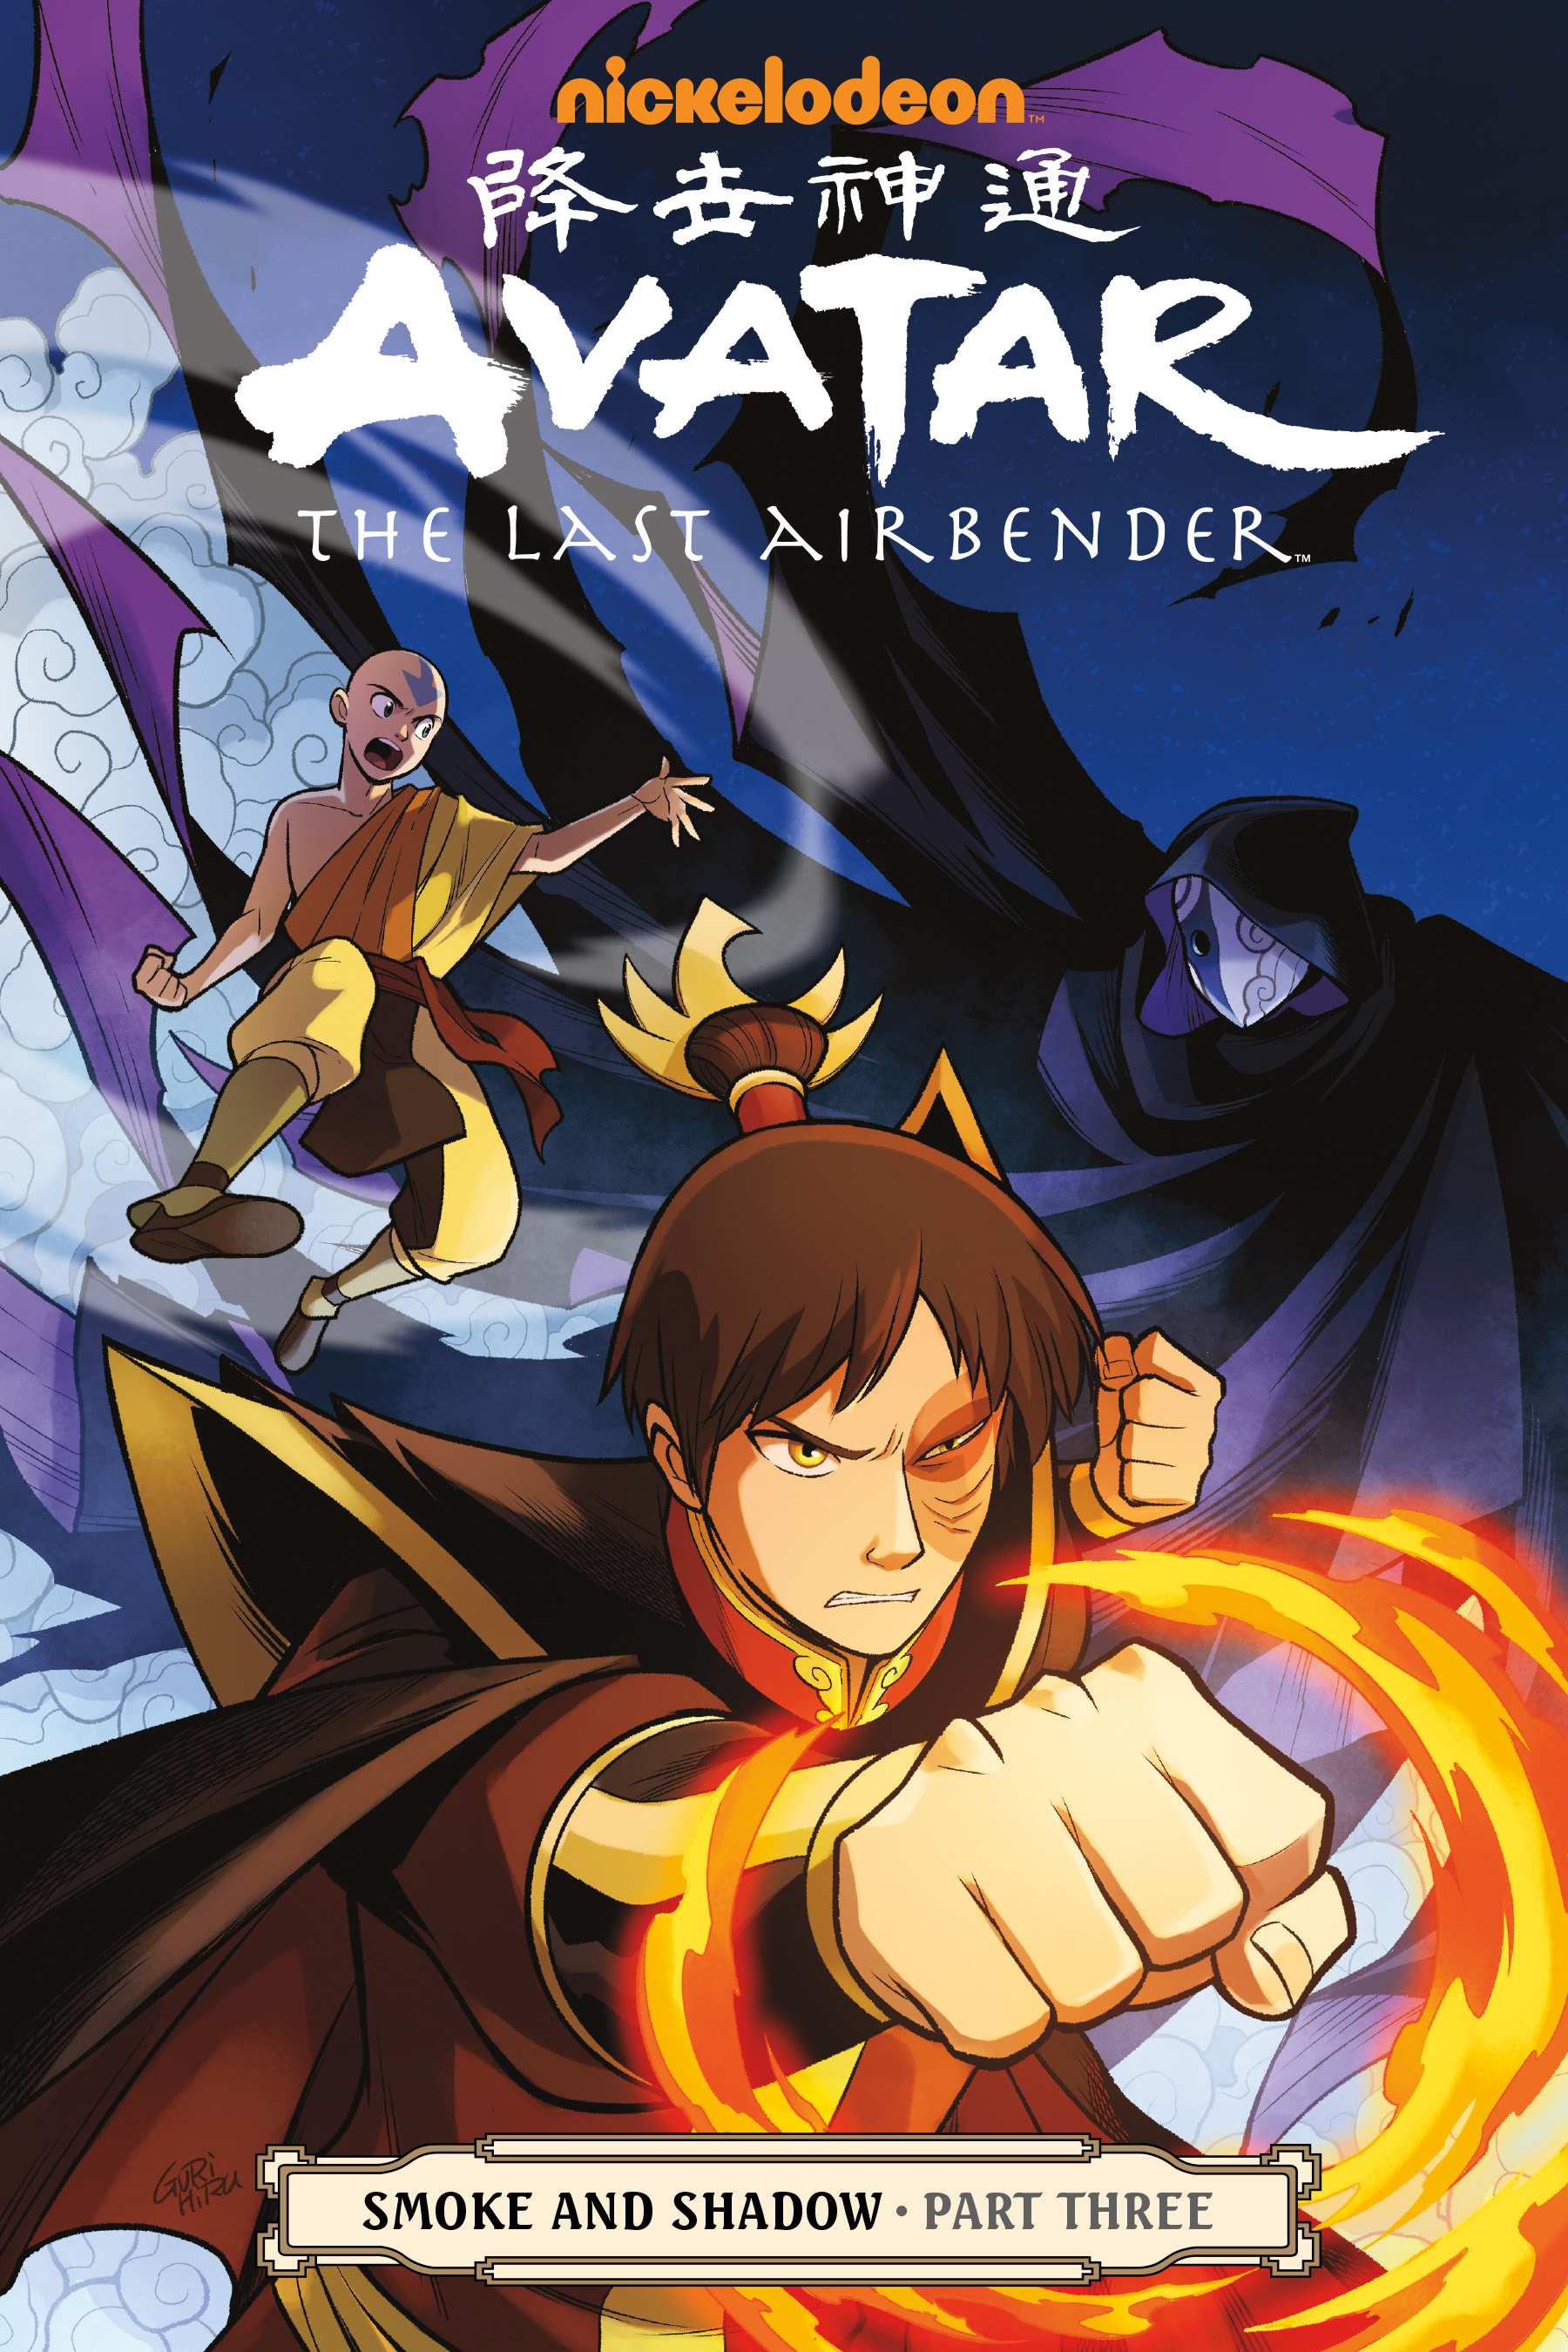 Read online Nickelodeon Avatar: The Last Airbender - Smoke and Shadow comic -  Issue # Part 3 - 1